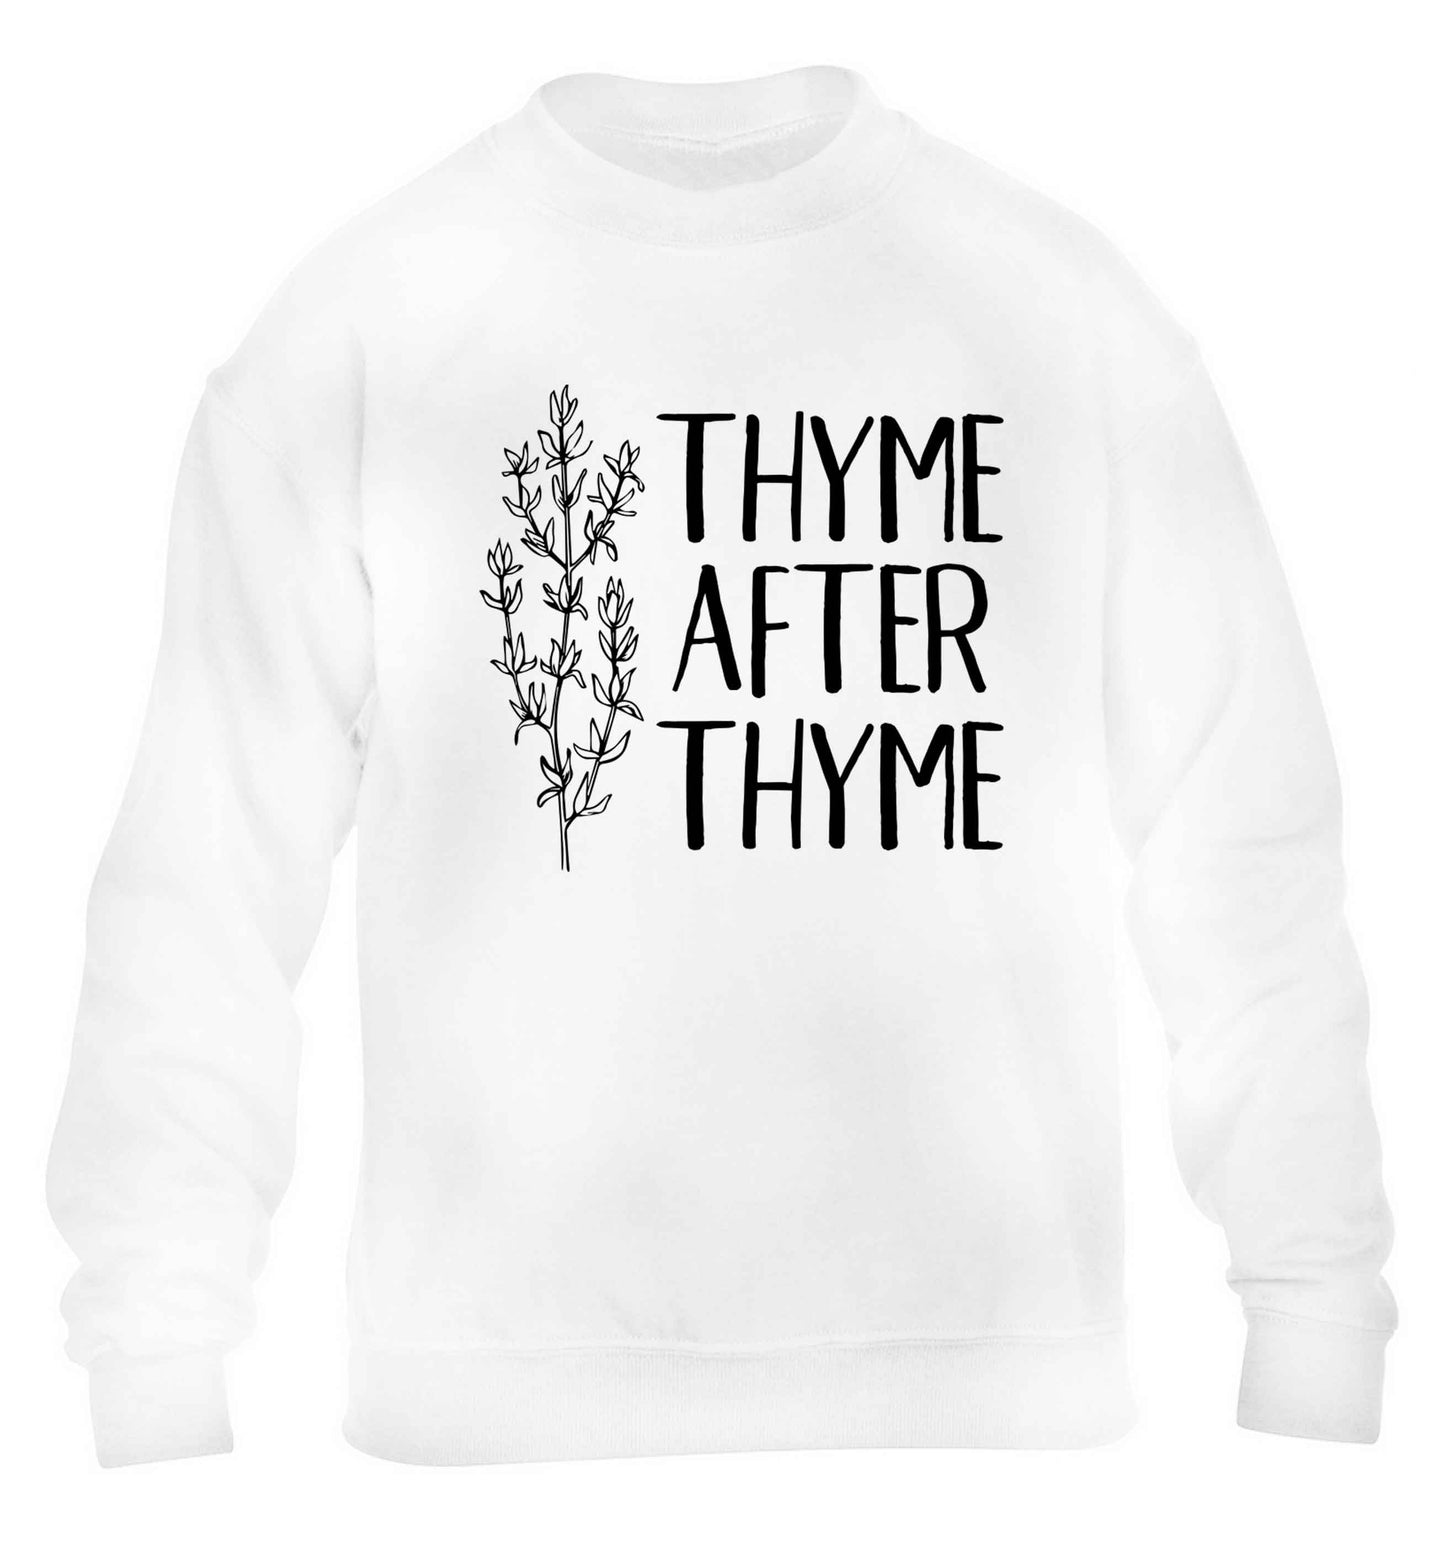 Thyme after thyme children's white sweater 12-13 Years